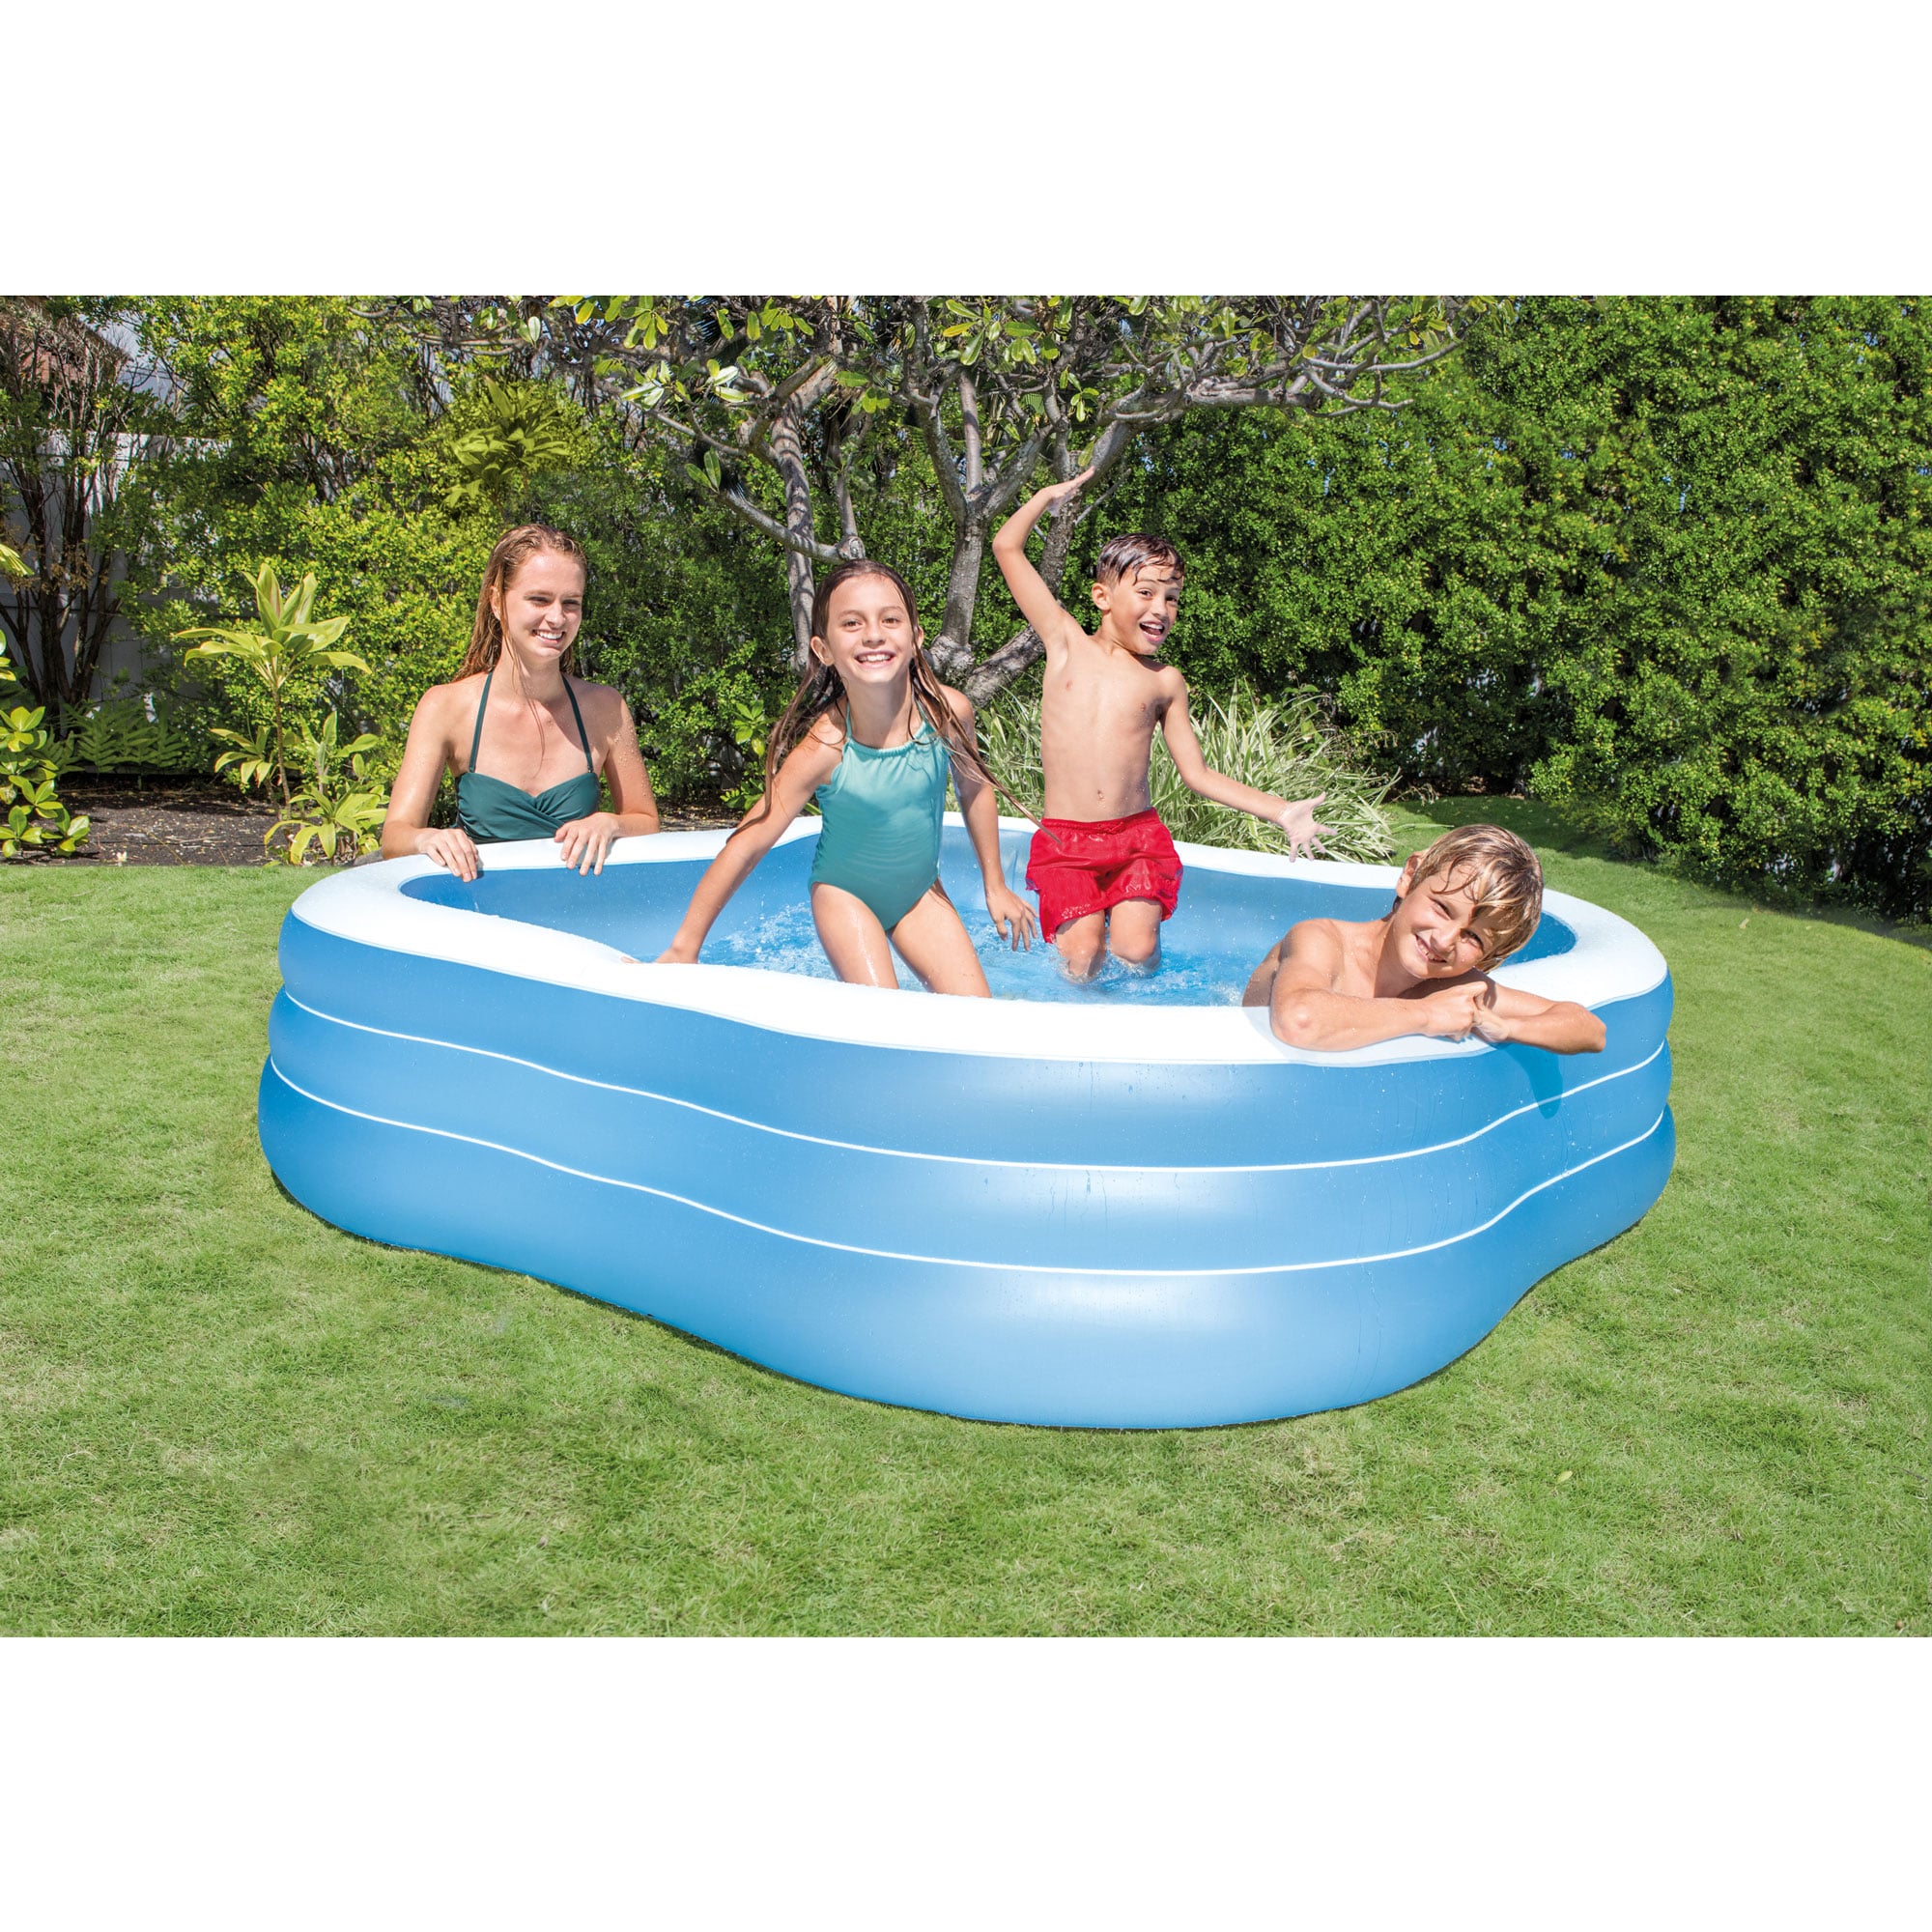 Kids 22" Deep EXTRA LARGE Inflatable Pool Above Ground Swimming Pool for Kiddie 